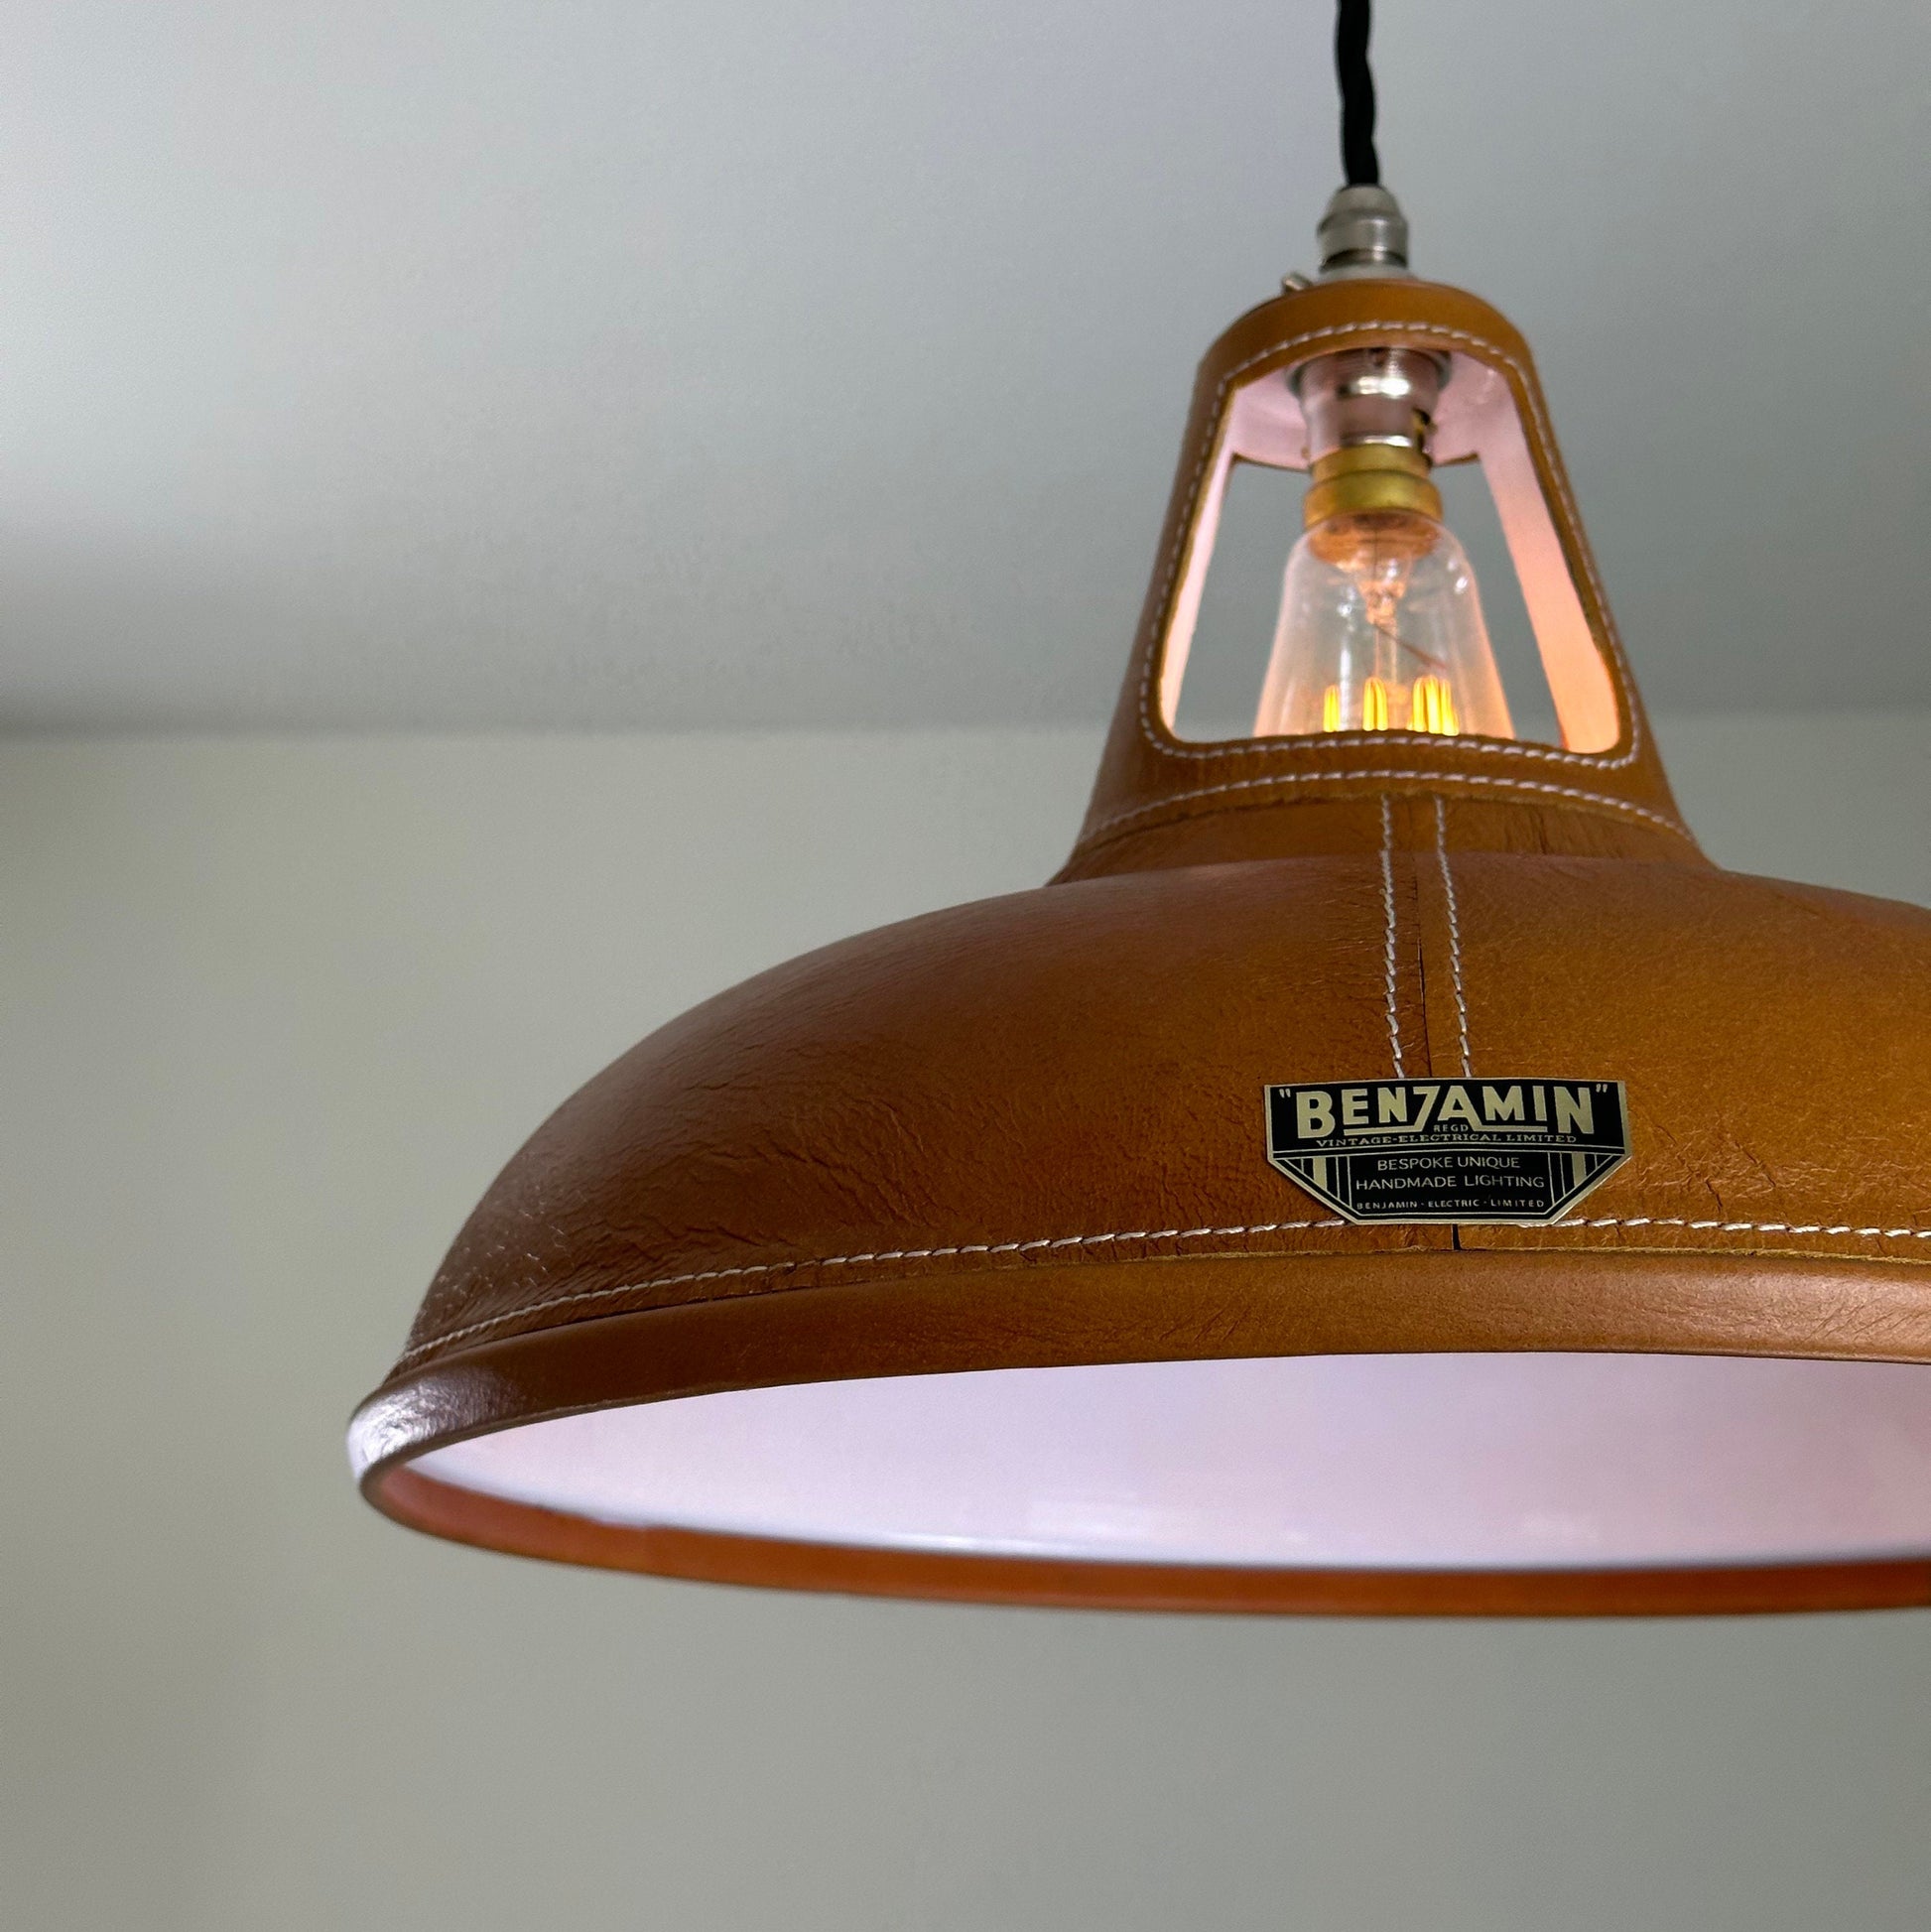 Cawston XL ~ Genuine Leather Solid Steel Lamp Shade 1932 Design Pendant Set Light | Ceiling Dining Room | Kitchen Table | Vintage | 14 Inch